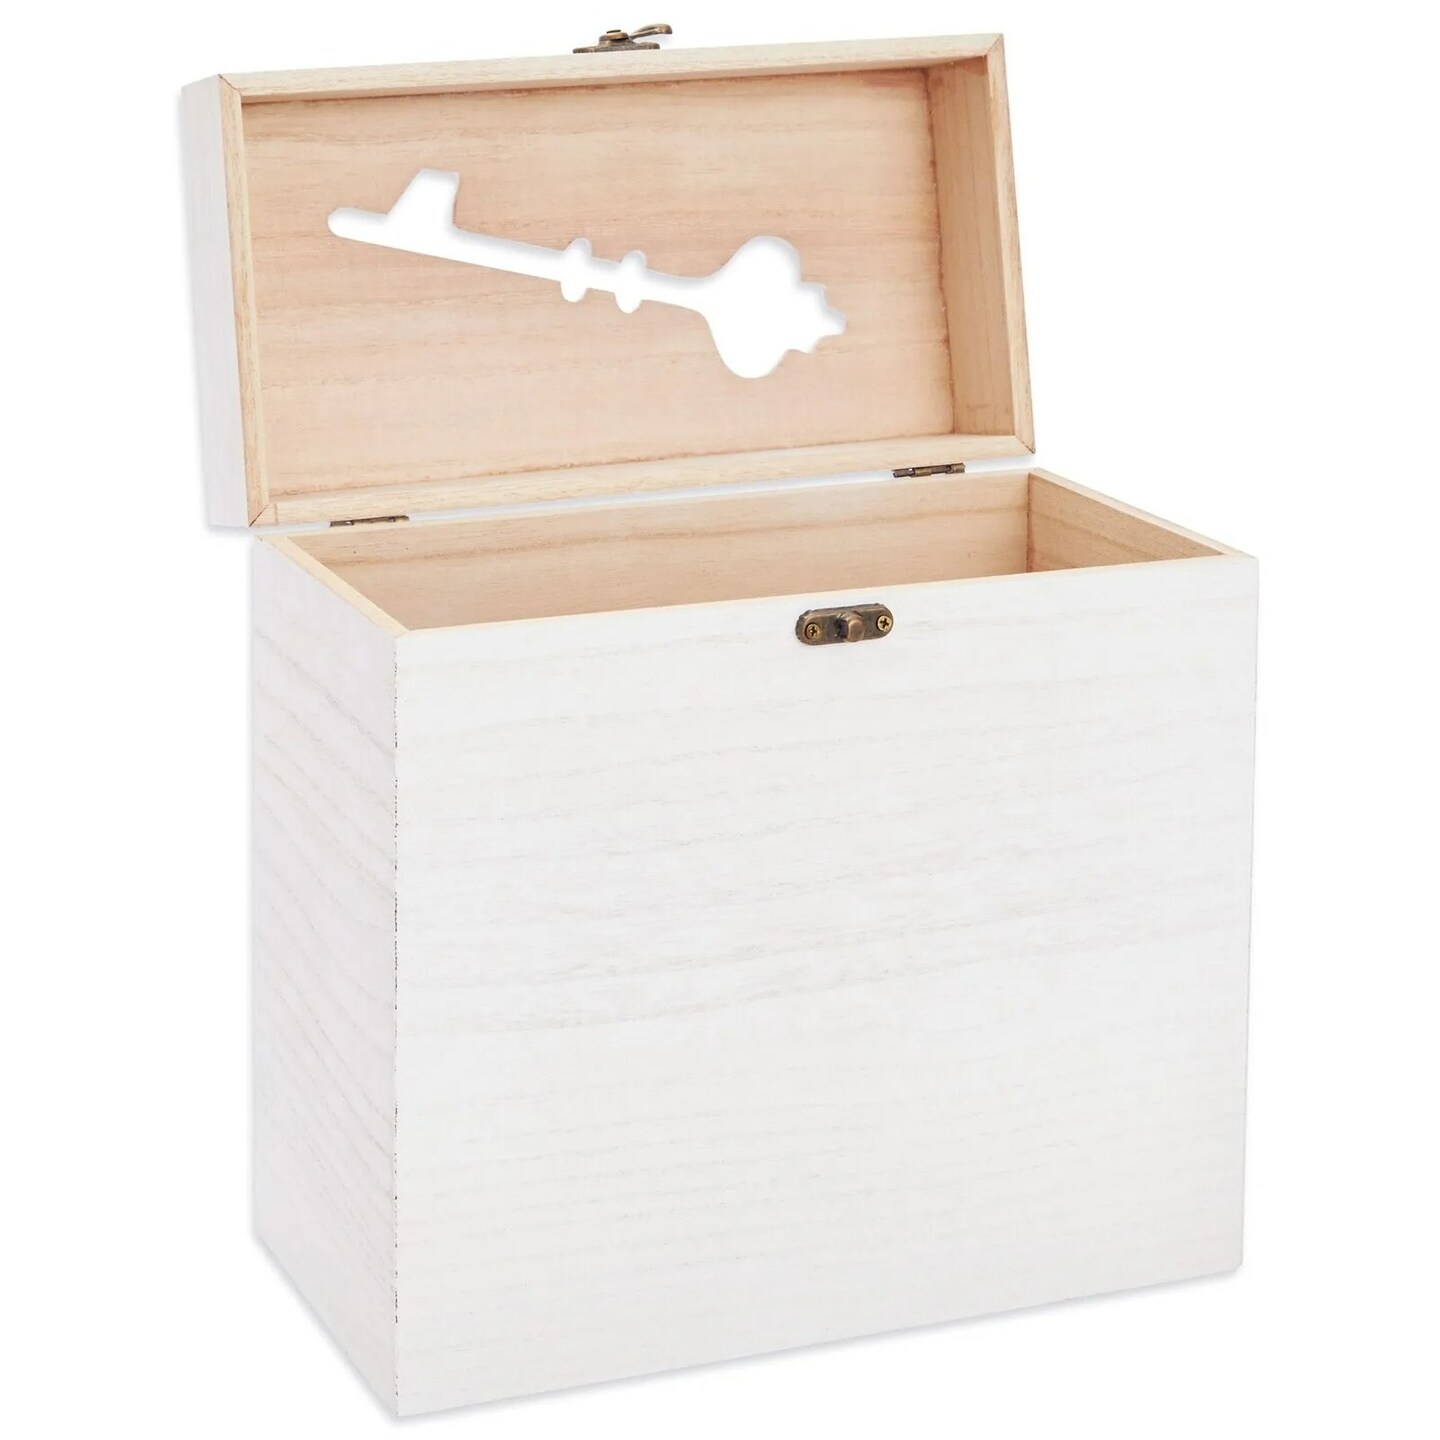 Rustic Wooden Wedding Card Box with Lock and Slot